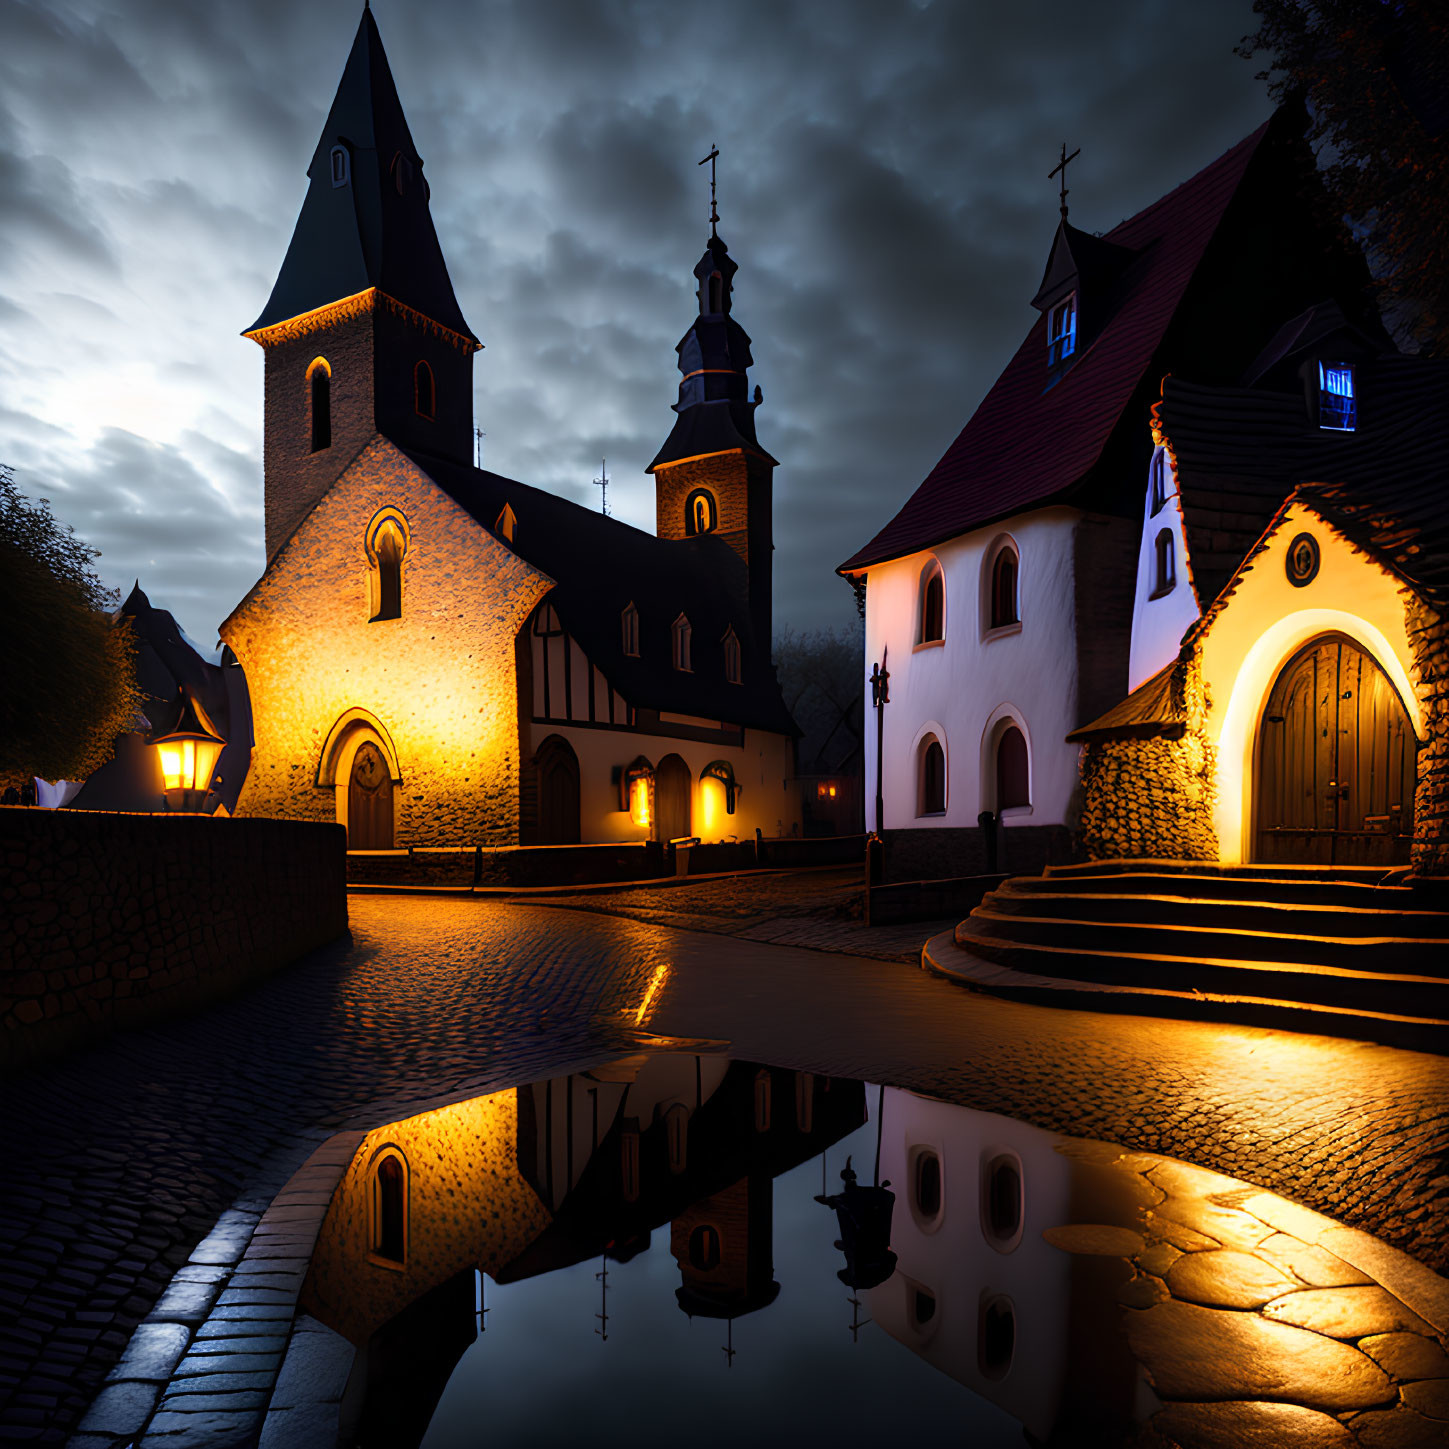 Medieval-style churches reflected in puddle on cobblestone street at night